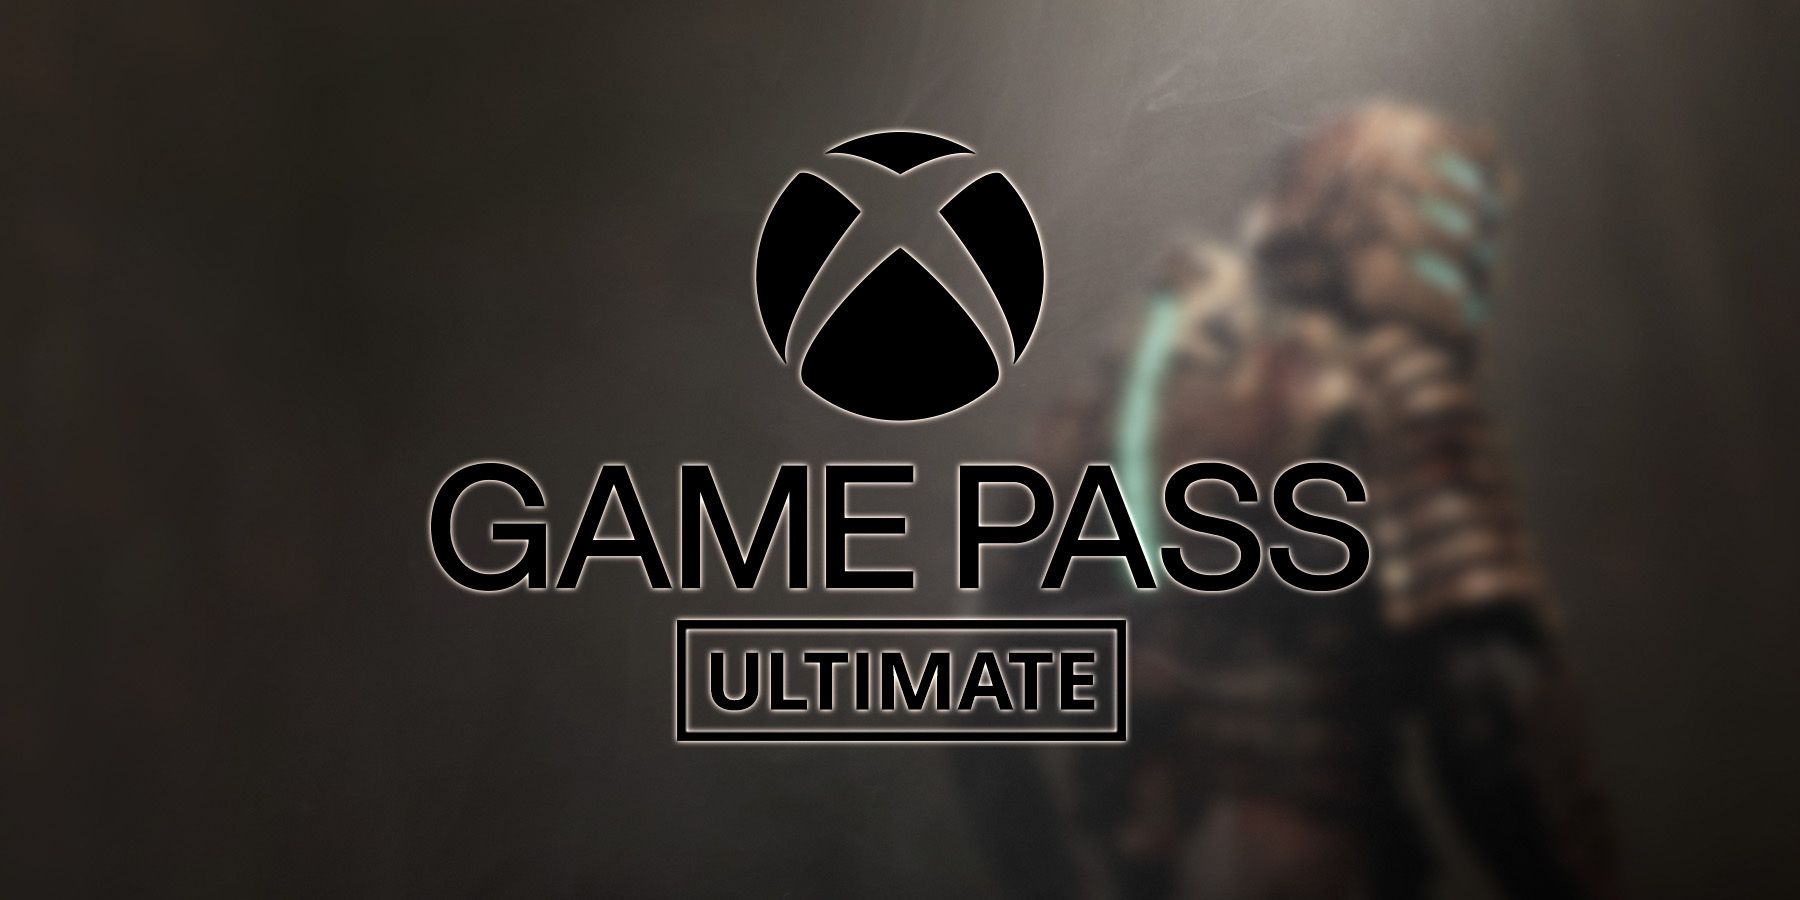 Xbox Game Pass Ultimate is now available